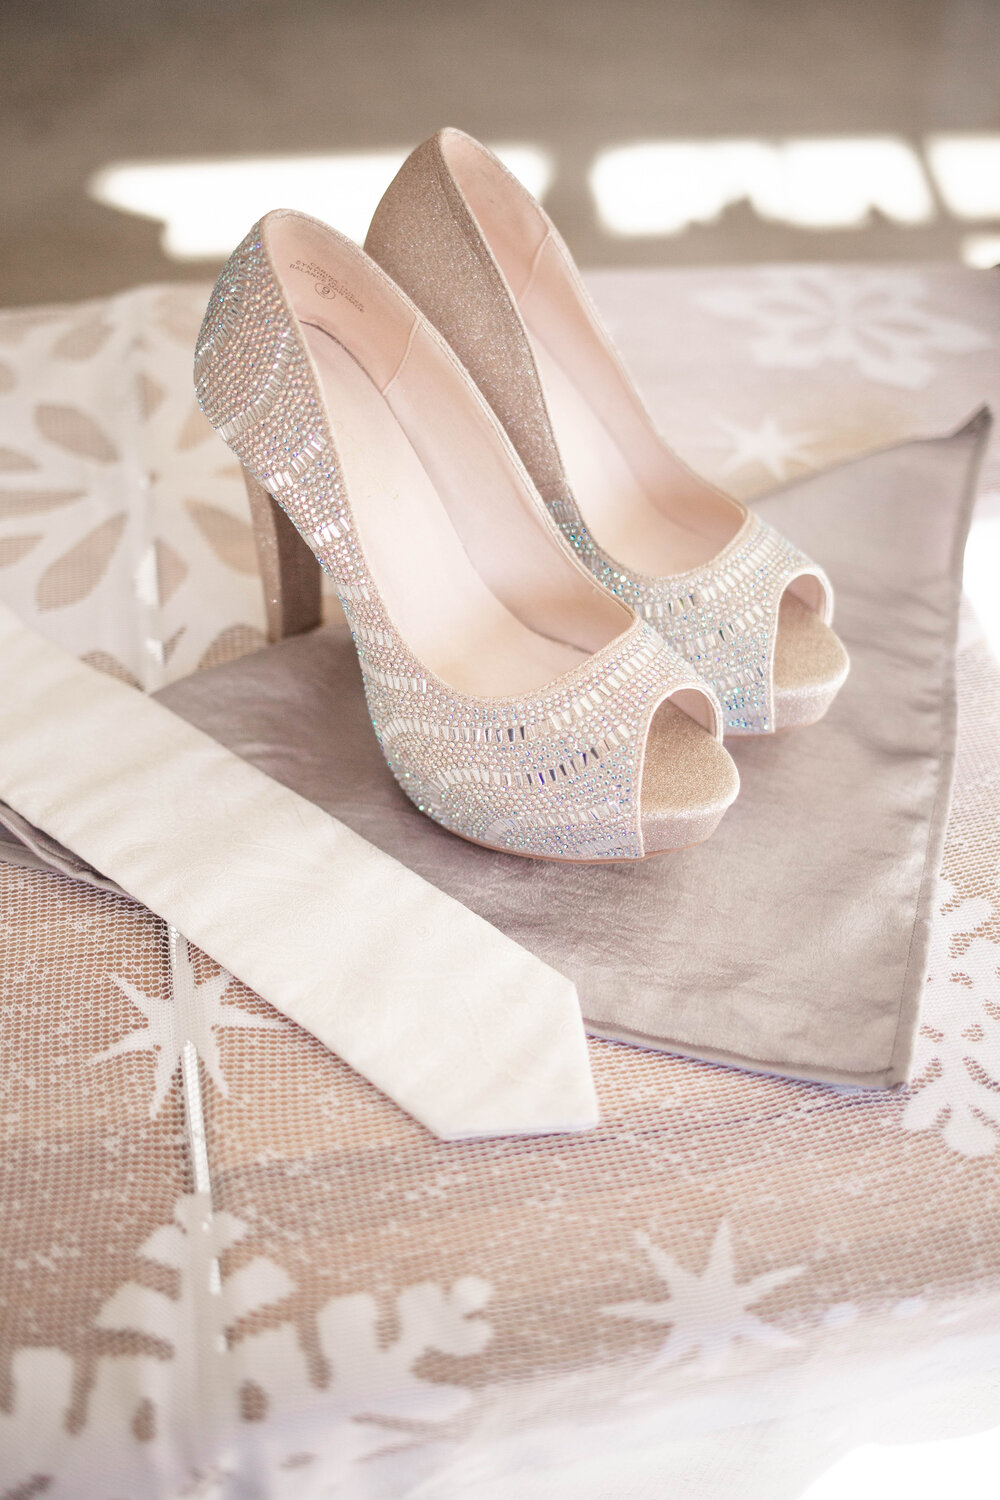 Winter wedding details including snow flakes and stars